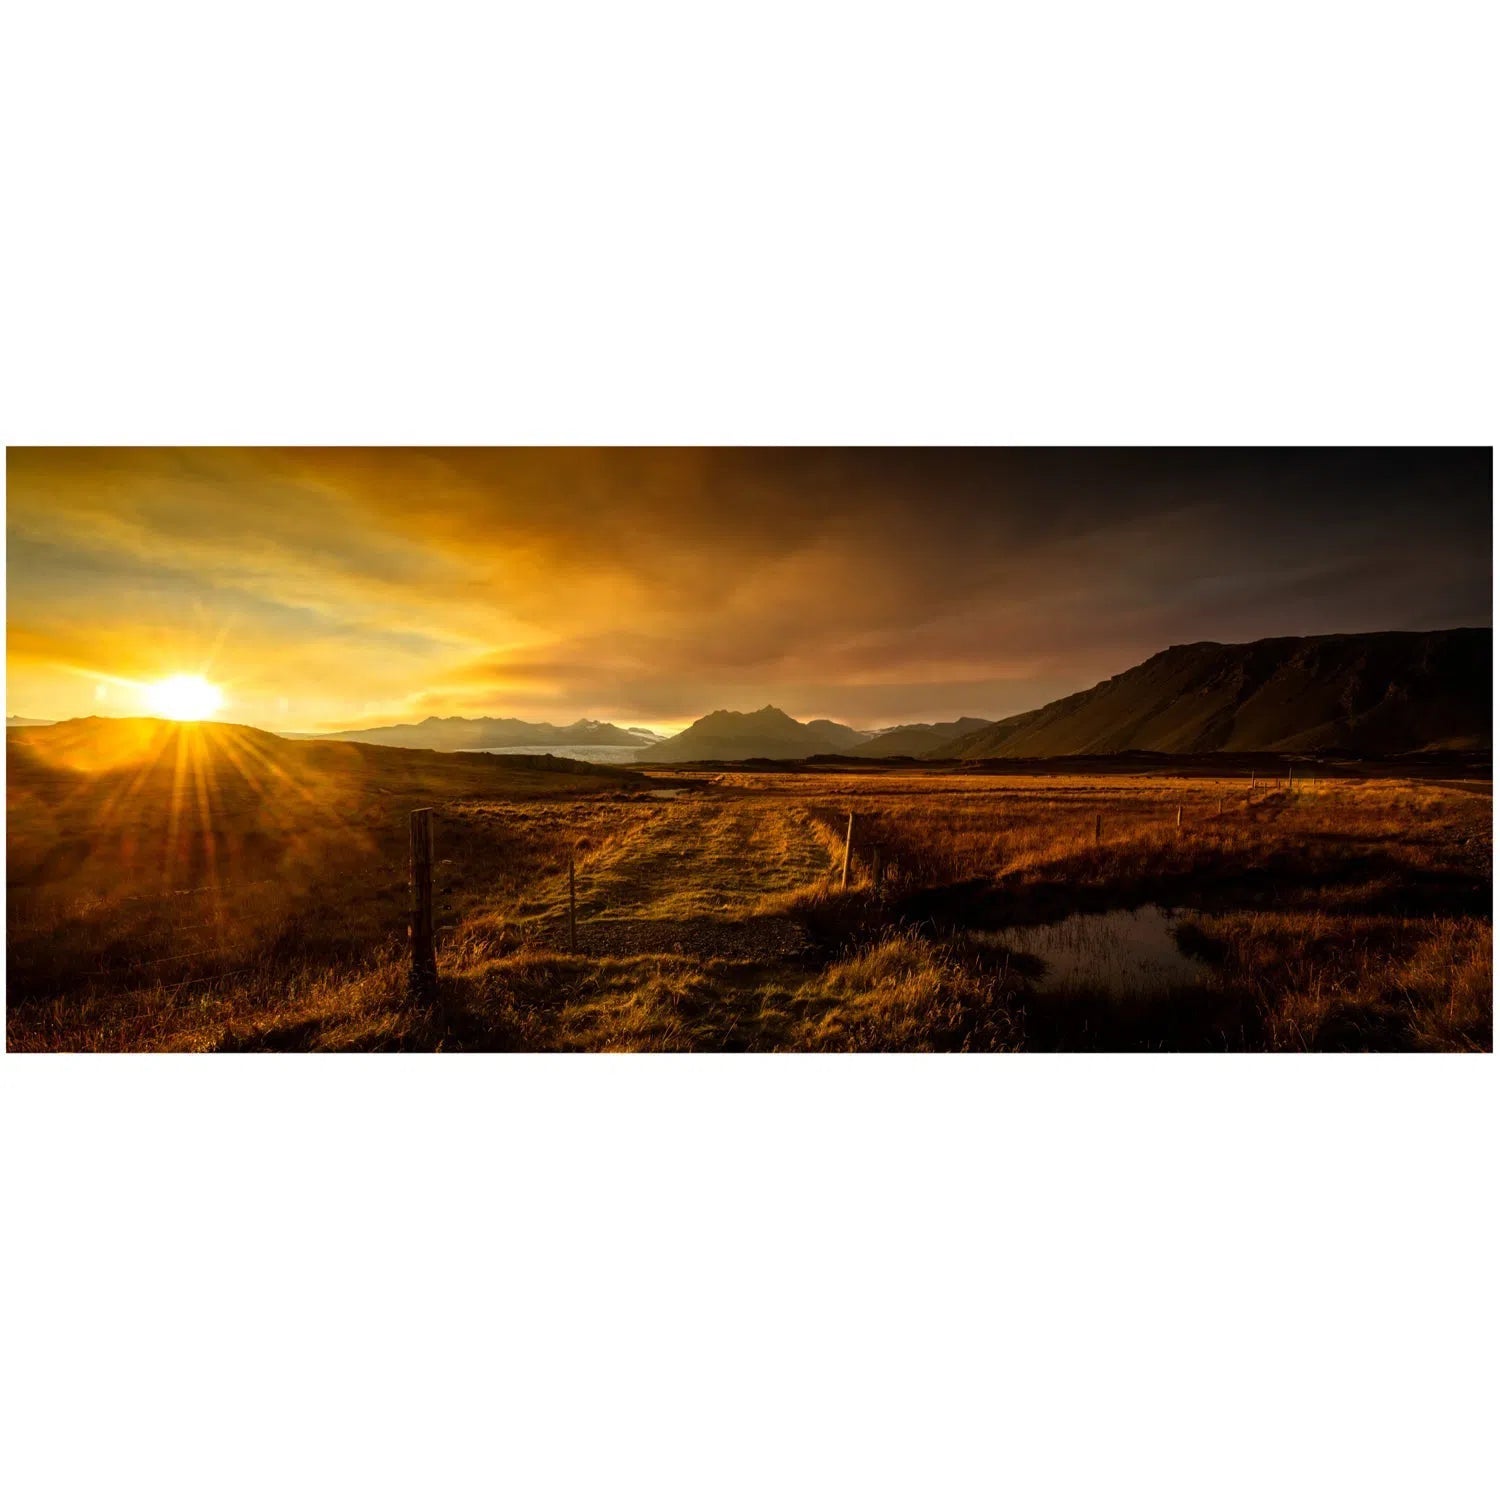 End of the day - Iceland-Imagesdartistes